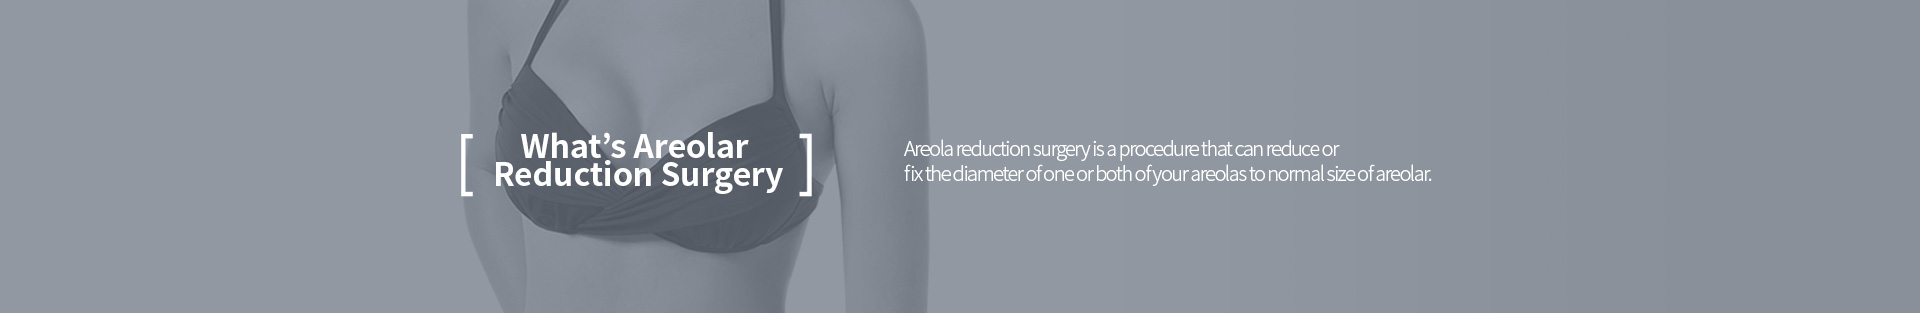 What’s Areolar Reduction Surgery, Areola reduction surgery is a procedure that can reduce or fix the diameter of one or both of your areolas to normal size of areolar